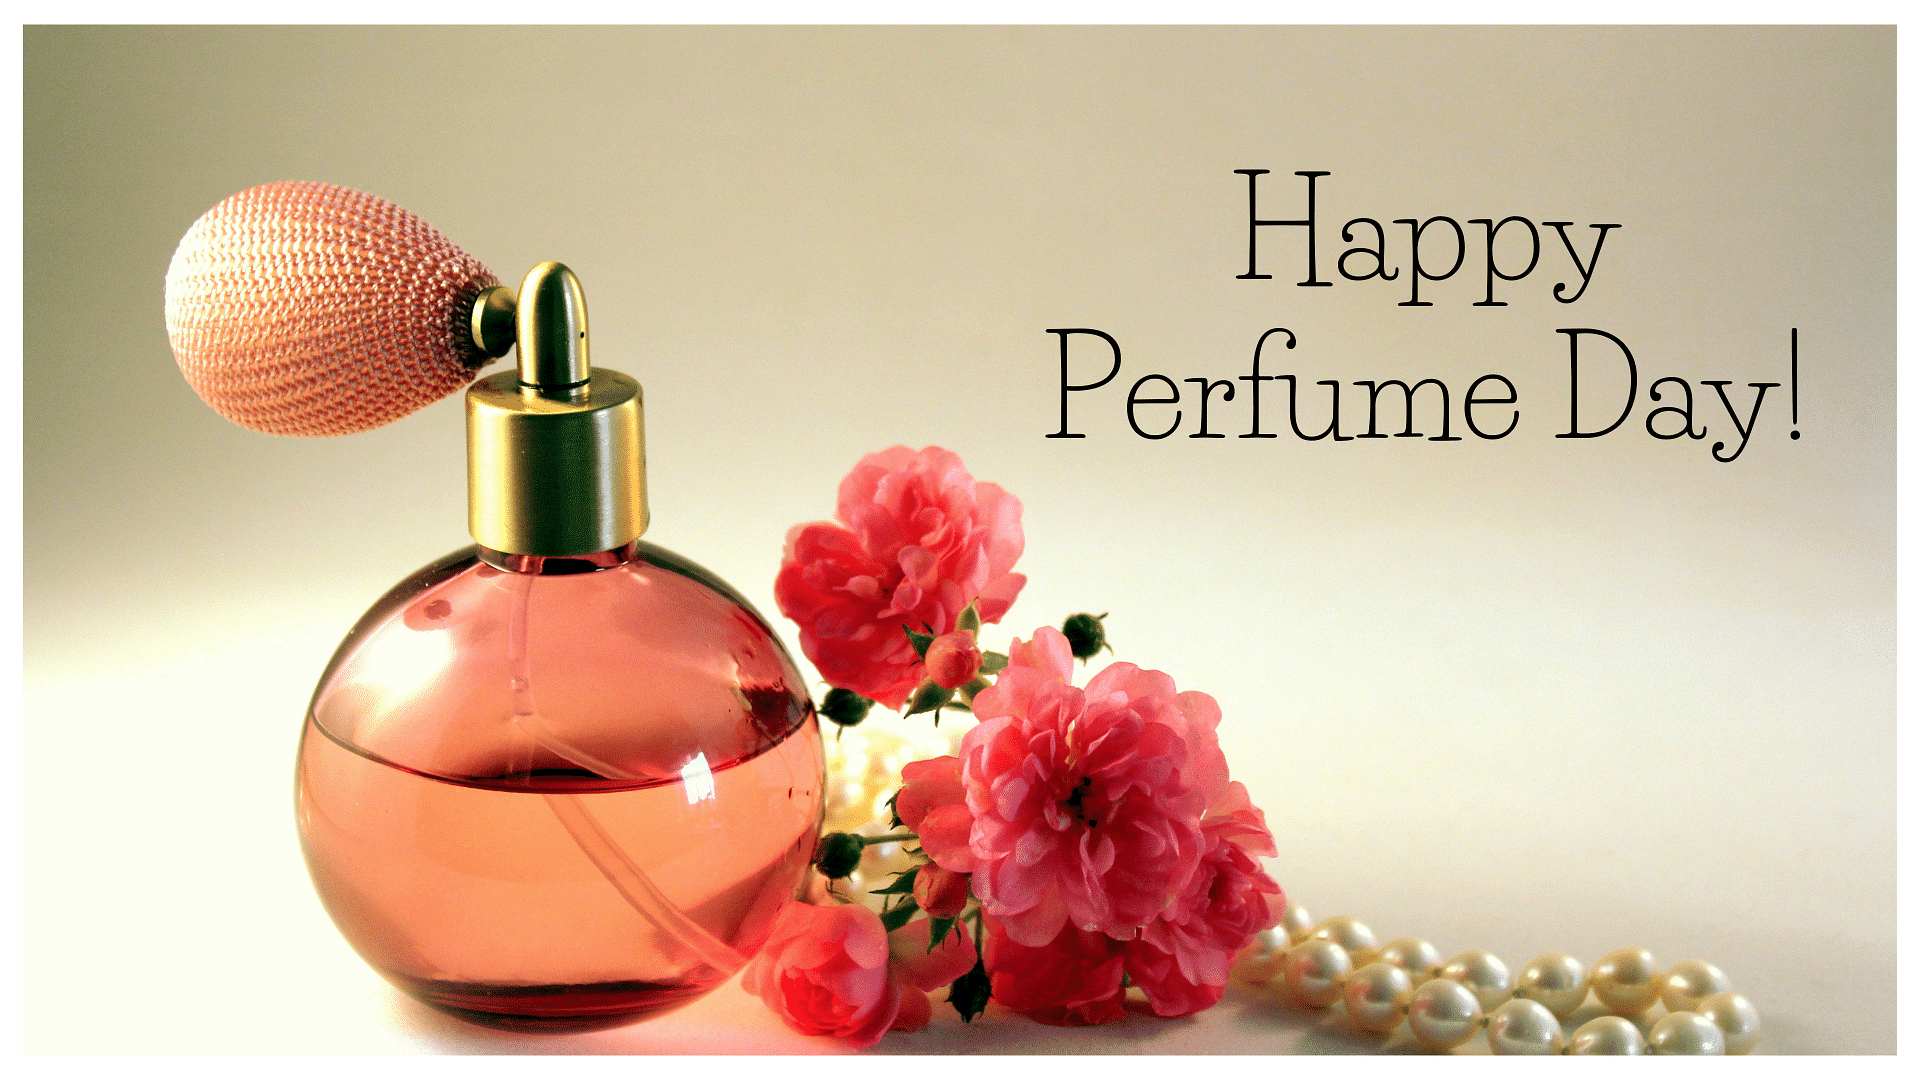 Perfume Day 2021: Images and Wishes 